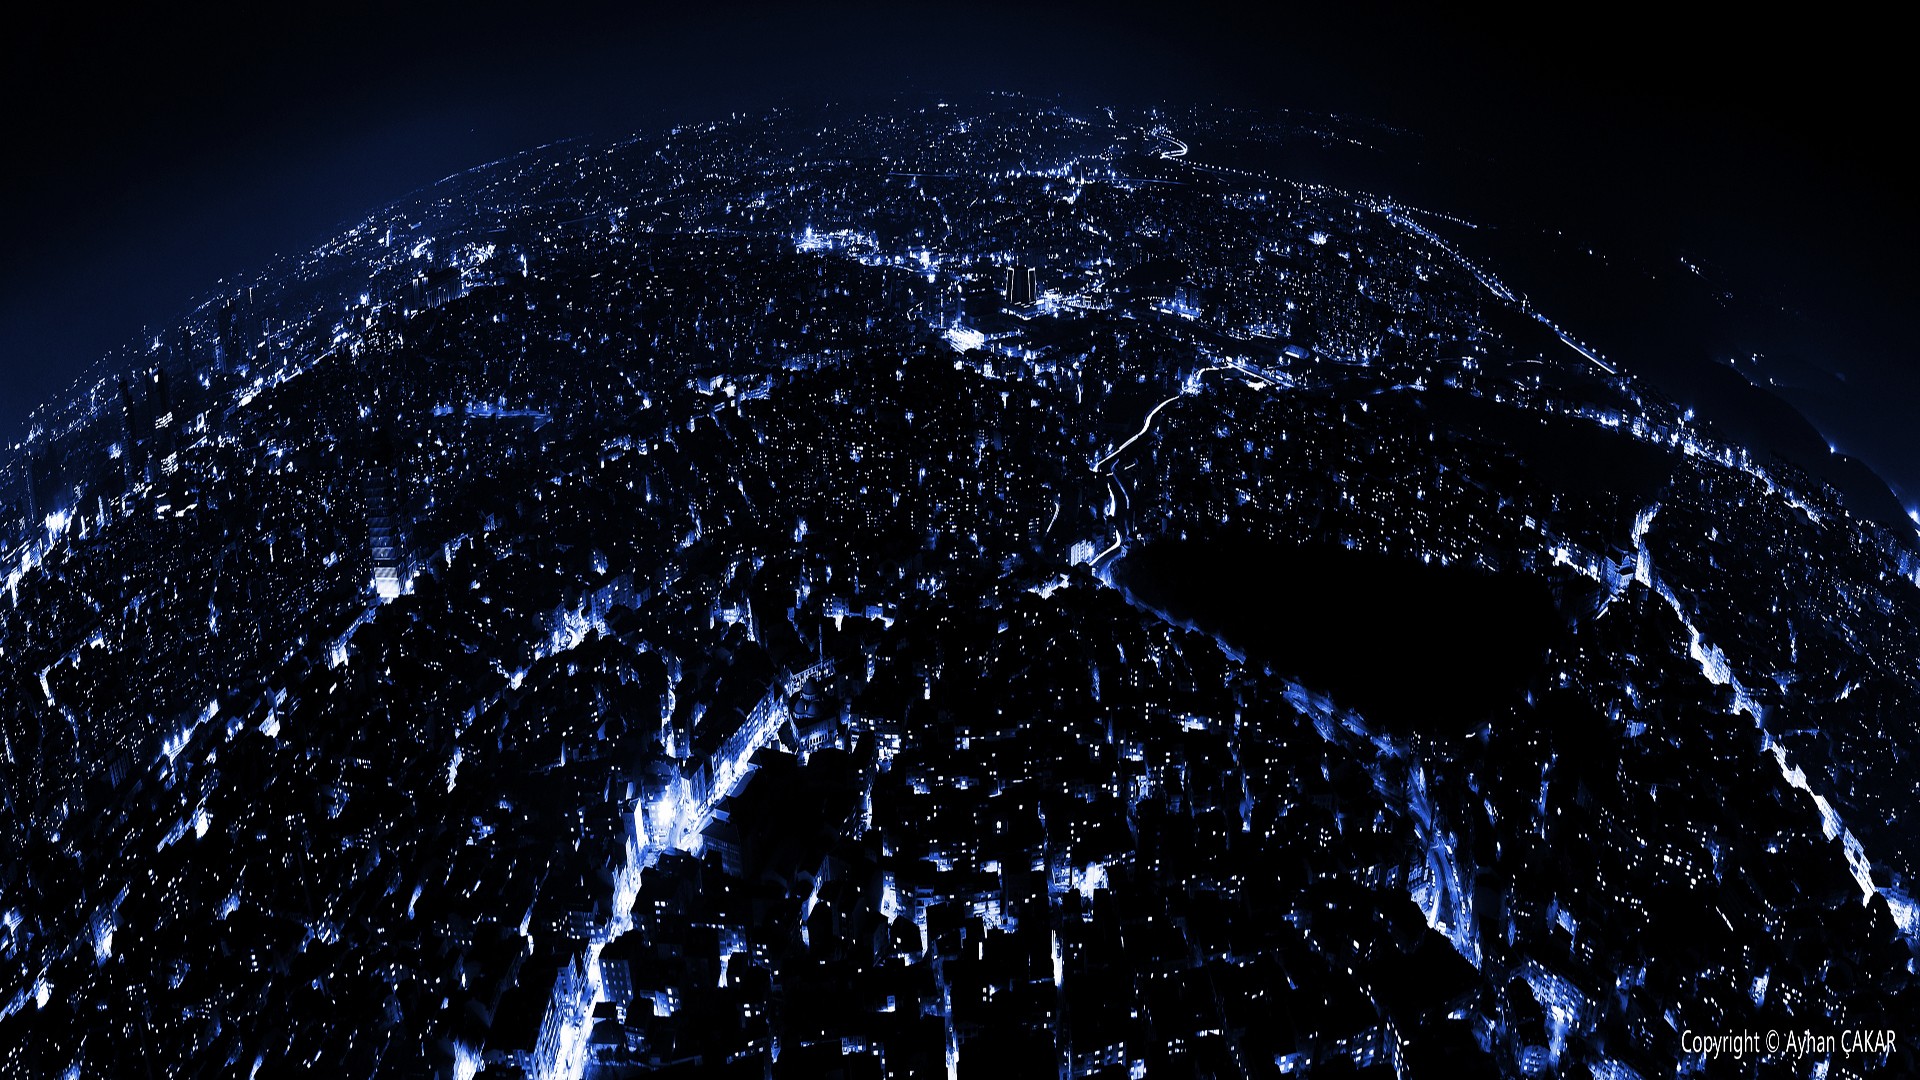 General 1920x1080 cityscape lights night blue city lights watermarked low light